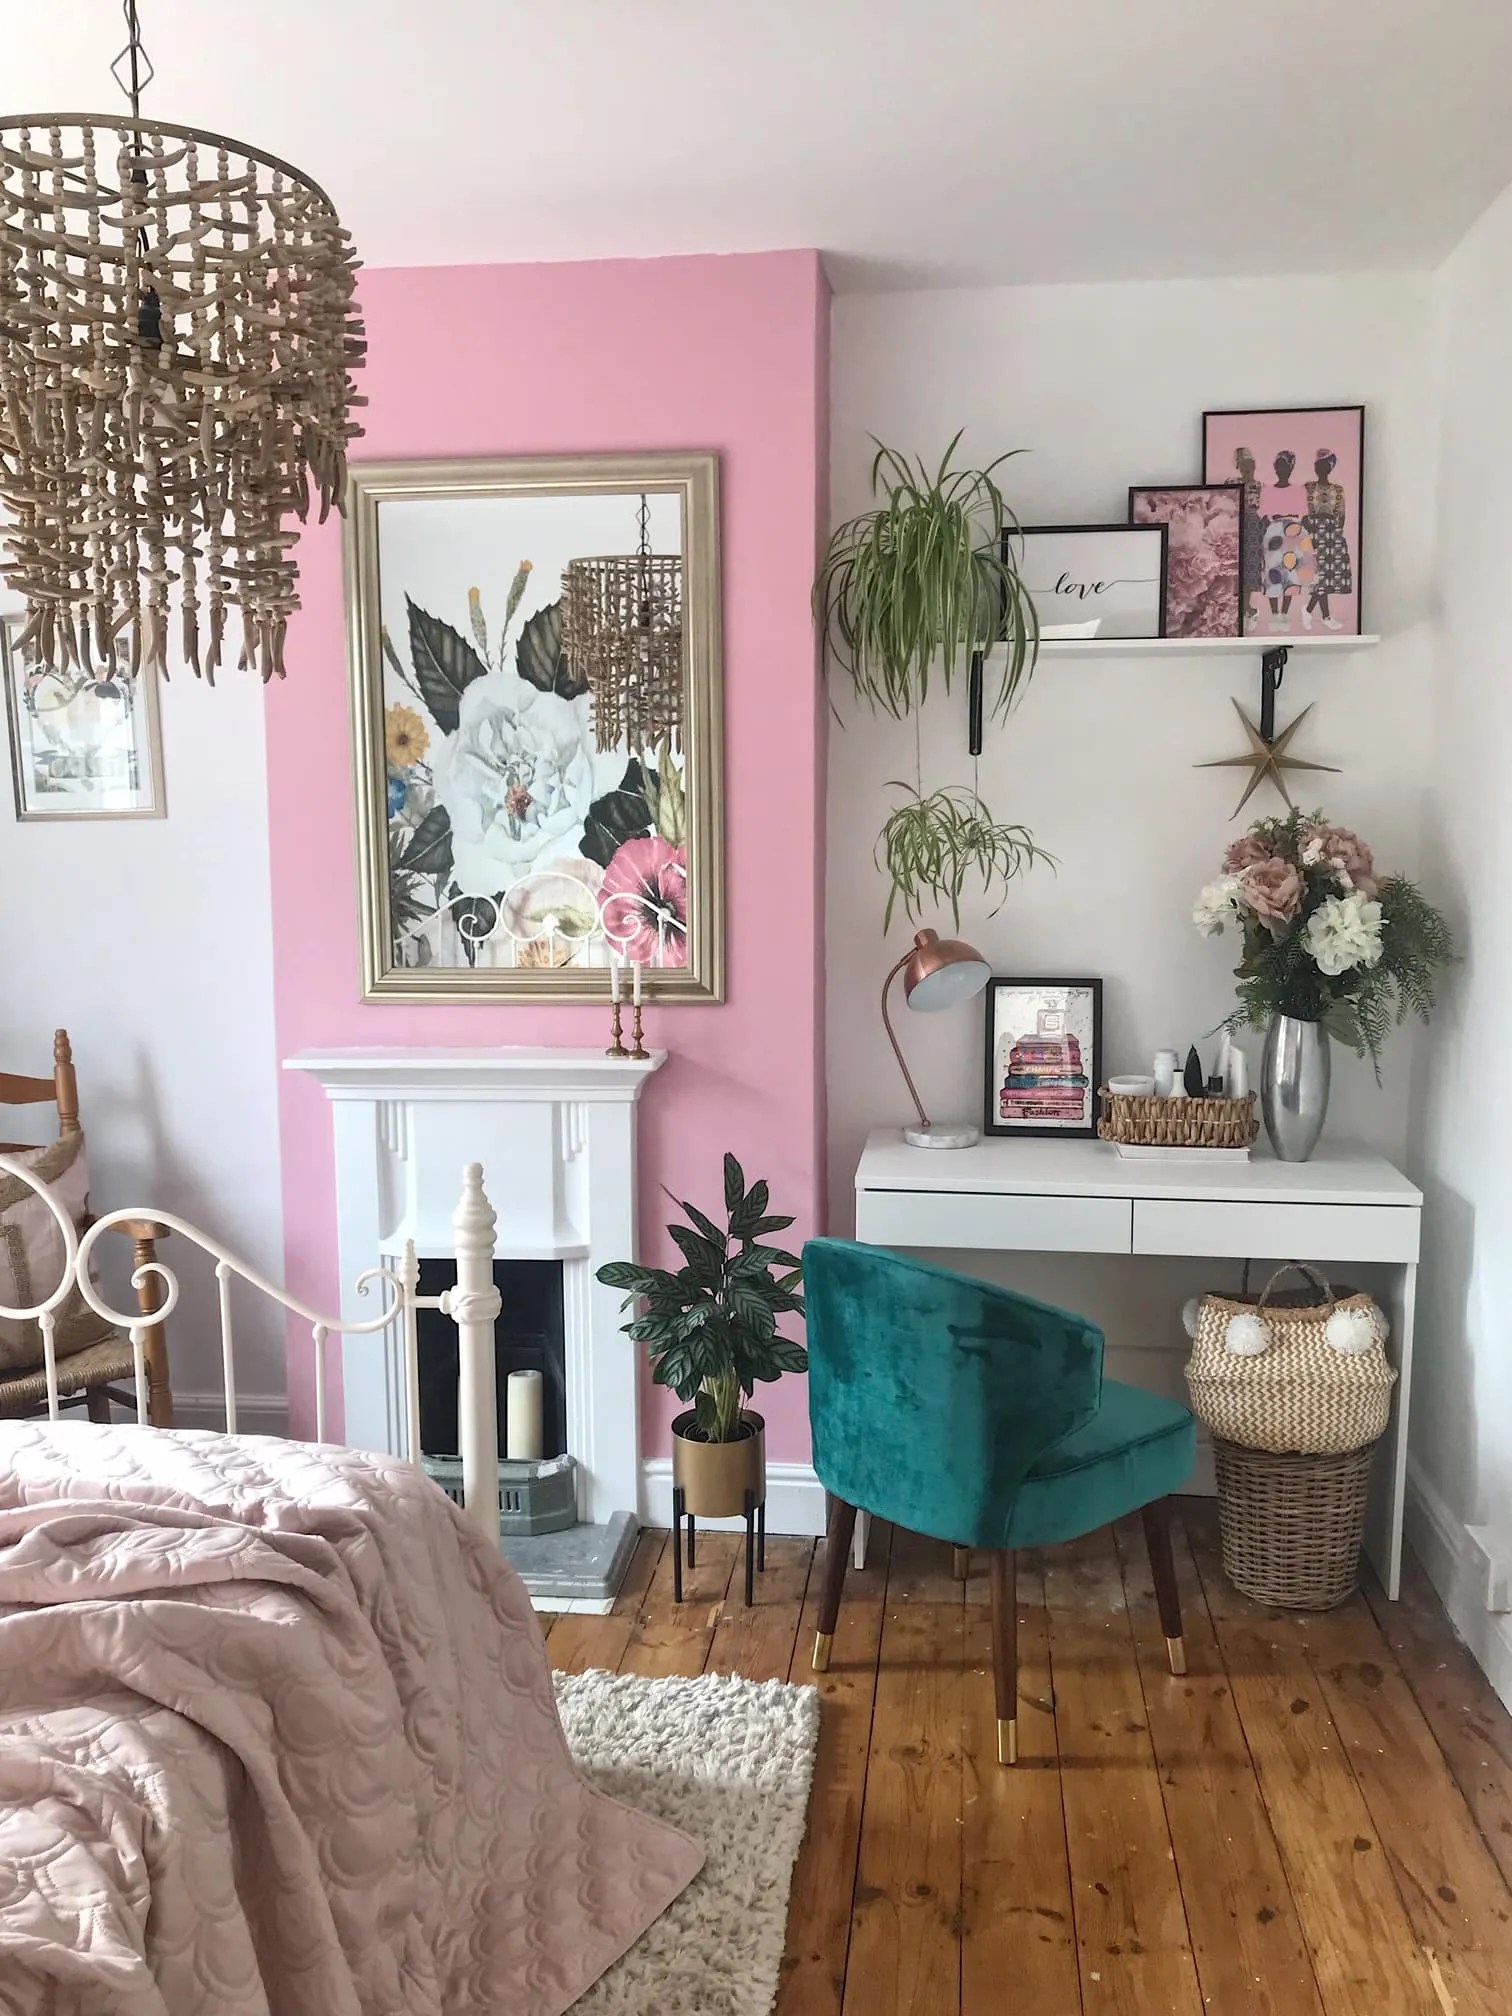 Updating our Bedroom With Valspar Pink Paint